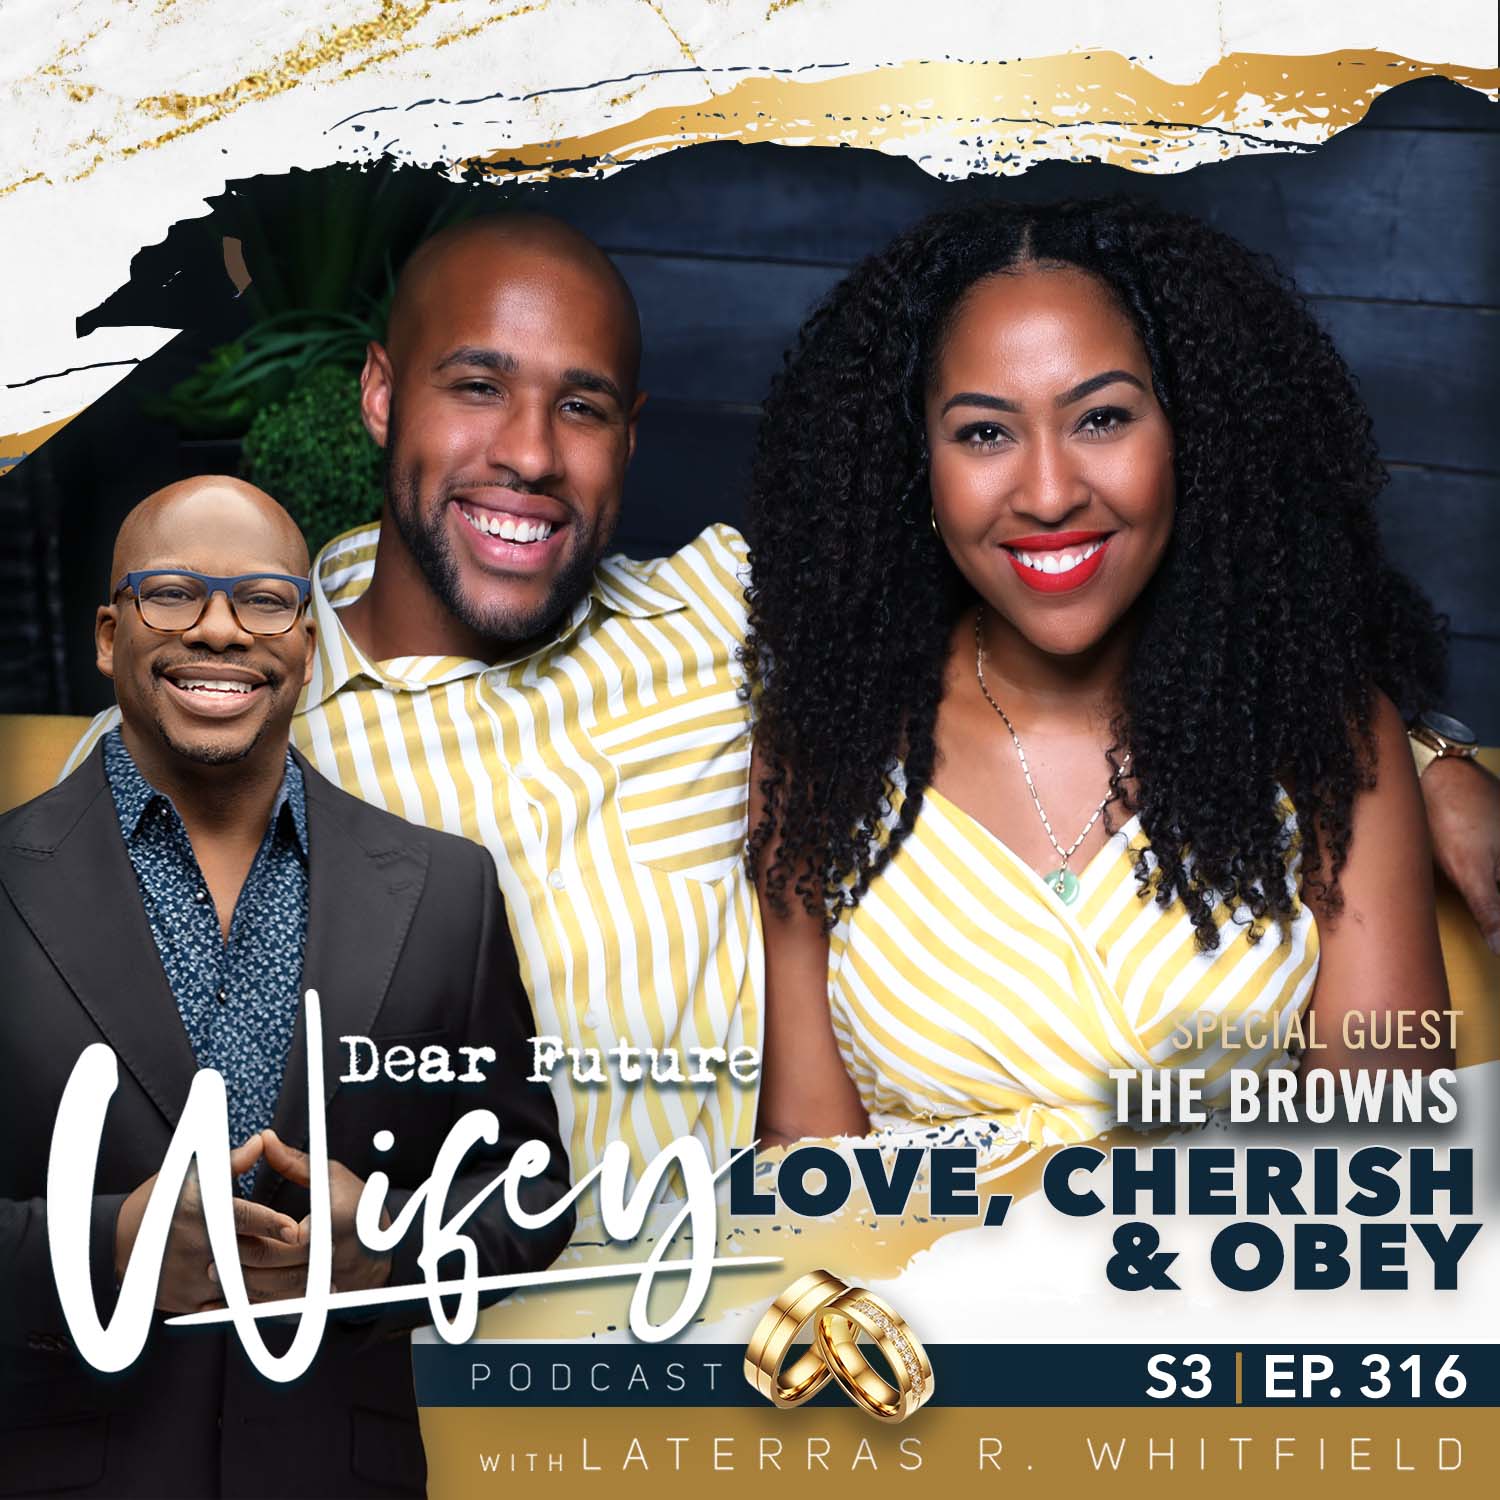 Love, Cherish, and Obey (Guests: Carrington & Ashley Brown)